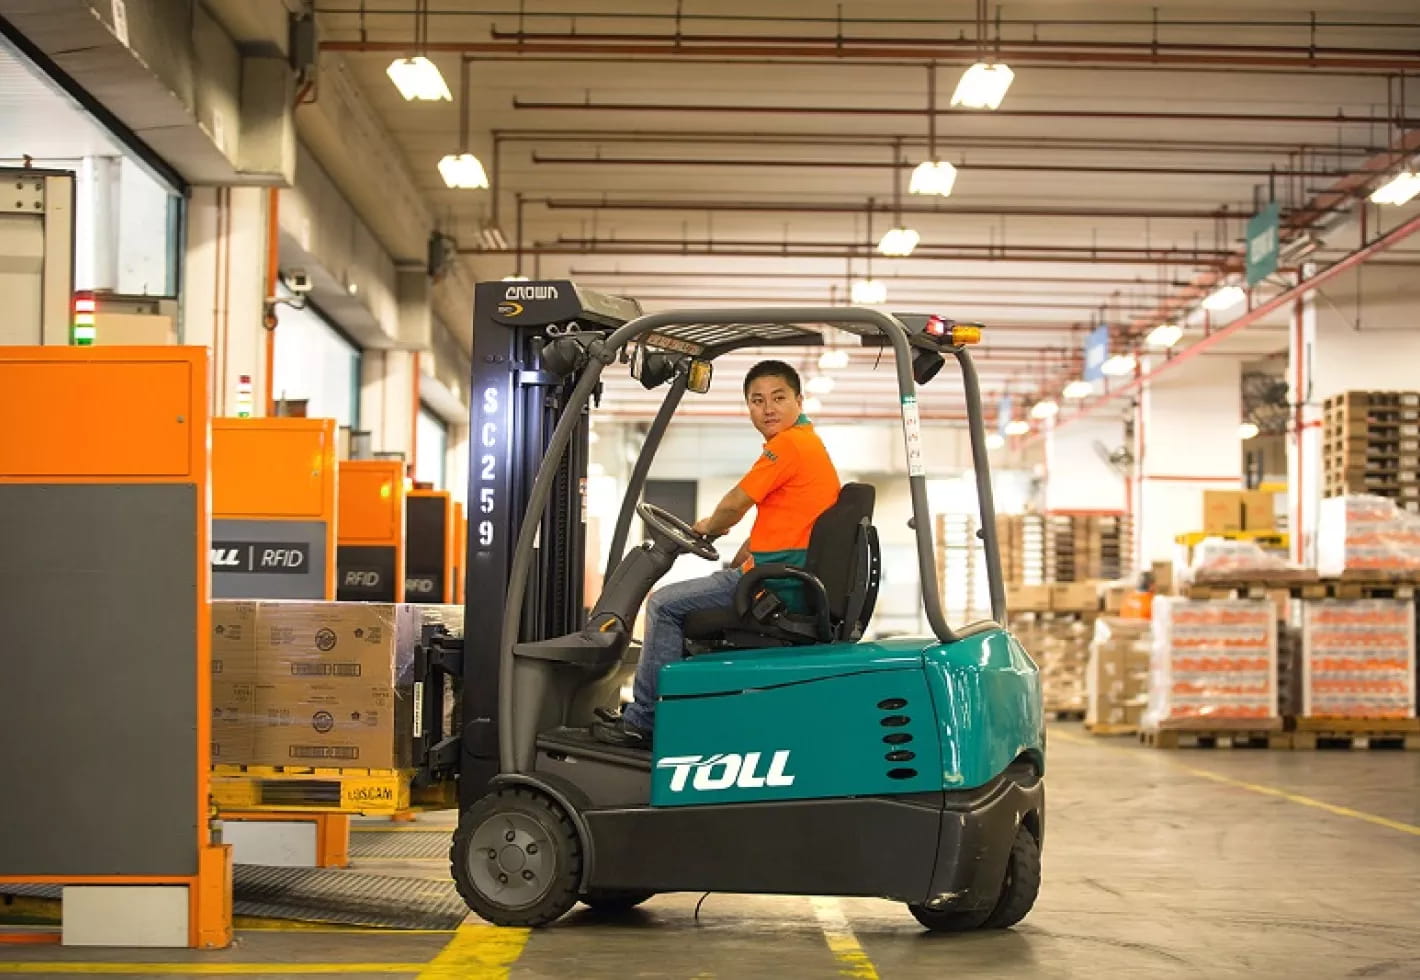 Partnering with Toll